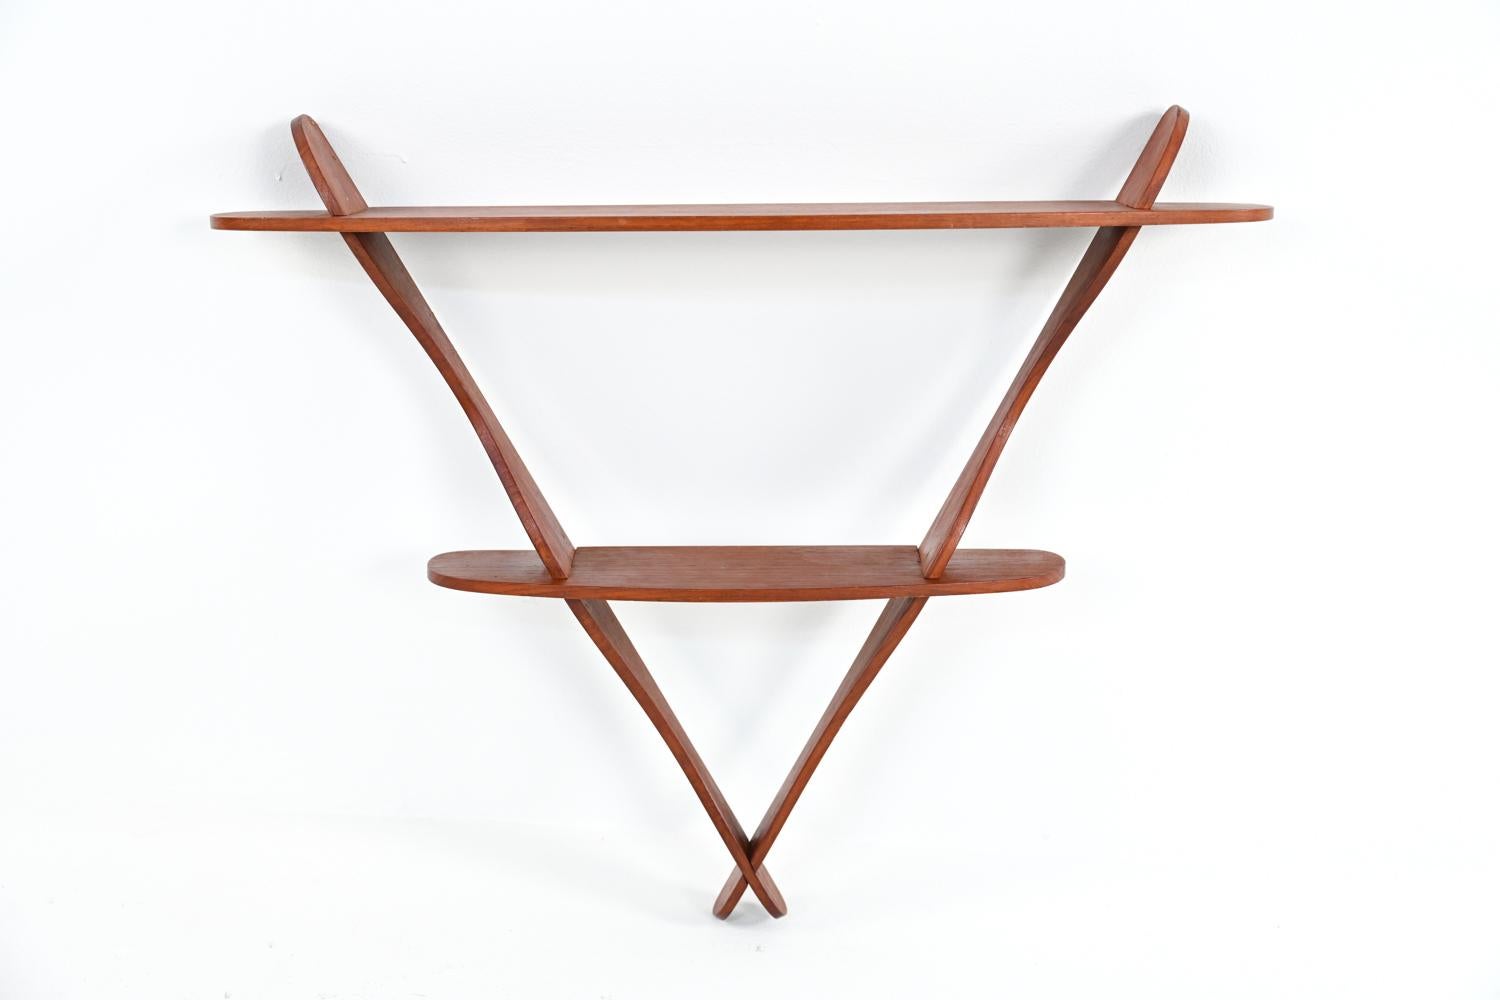 A Danish mid-century organic triangular-form wall-mount two-tier shelf in teak wood, attributed to eccentric designer Peder Moos, 1950's. A stylish and functional example of Scandinavian modern design. No apparent markings.